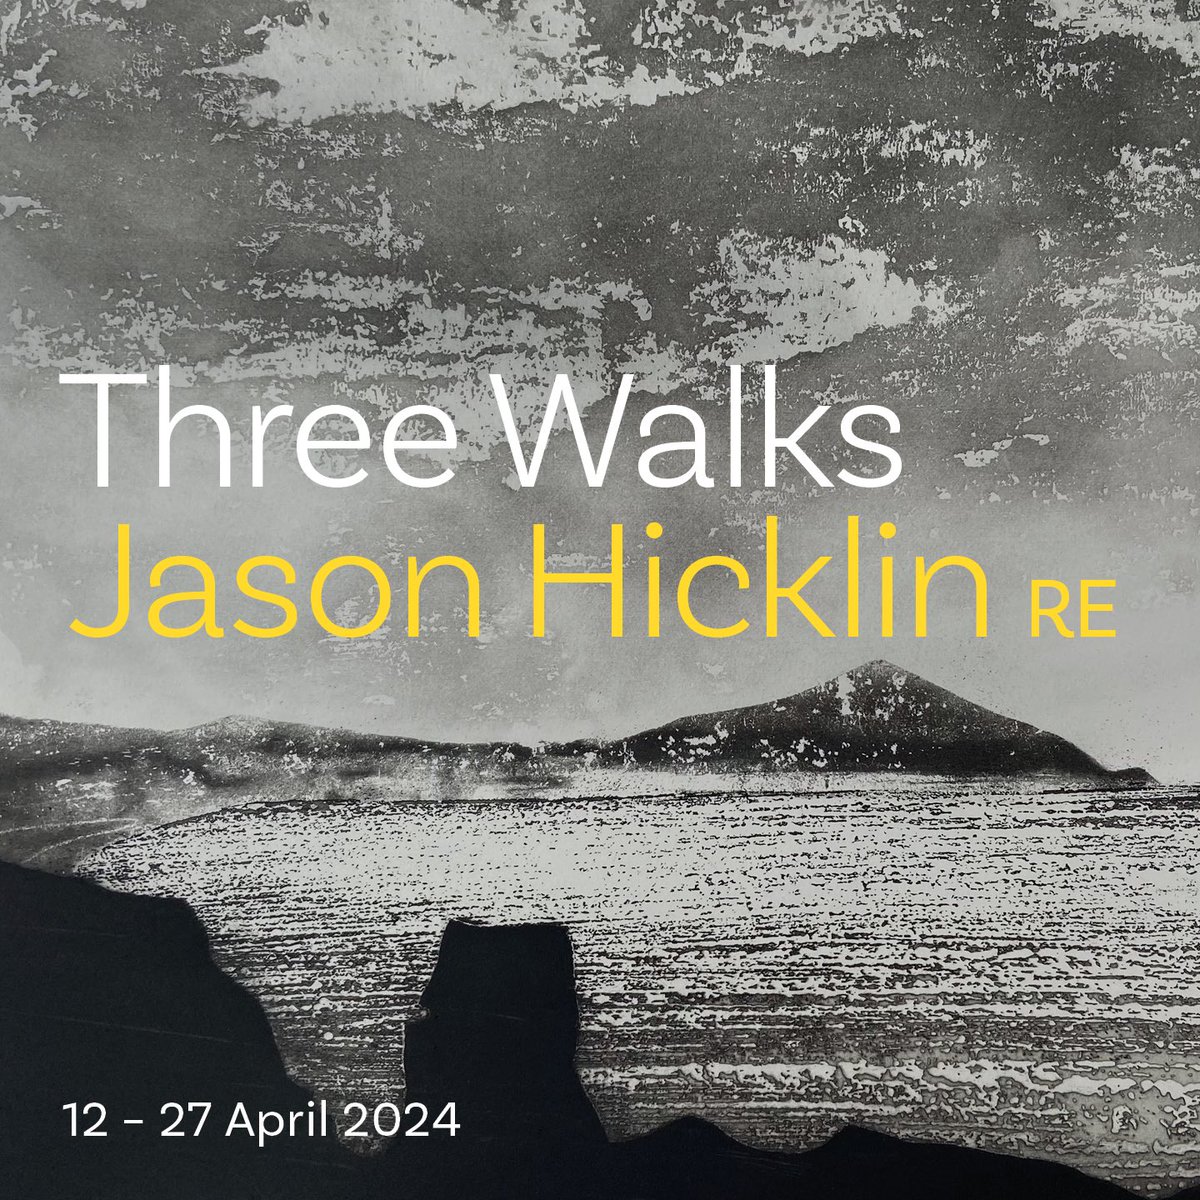 Coming next week - 12-27 April, solo exhibition by Jason Hicklin RE, inspired by three walks in North Yorkshire, Pembrokeshire and The Thames.